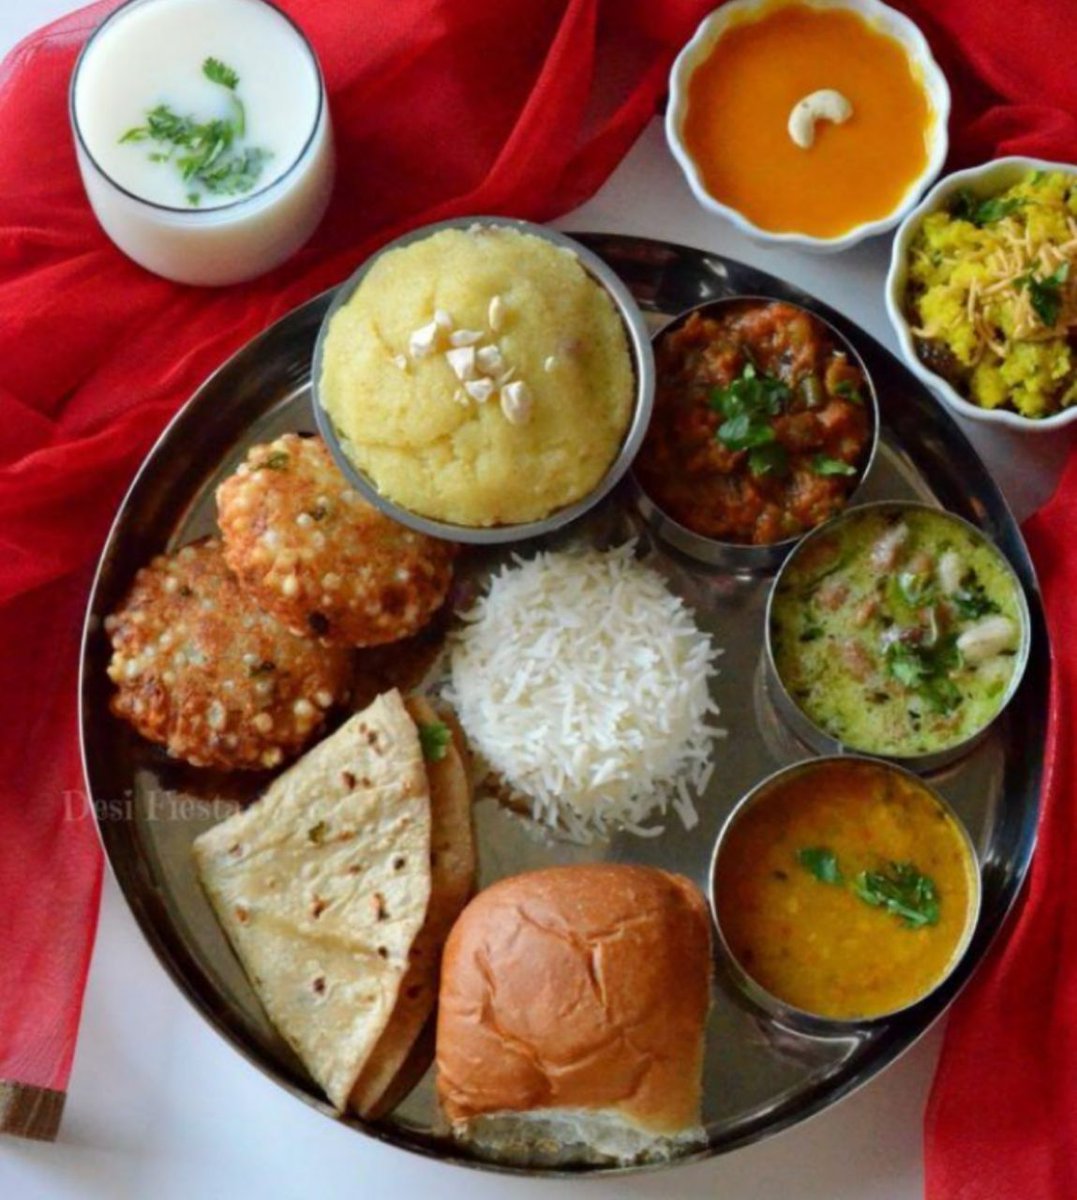  #MaharashtraMaharashtrian cuisine includes mild and spicy dishes. Wheat, rice, jowar, bajri,vegetables, lentils and fruit are dietary staples. Peanuts and cashews are often served with vegetables